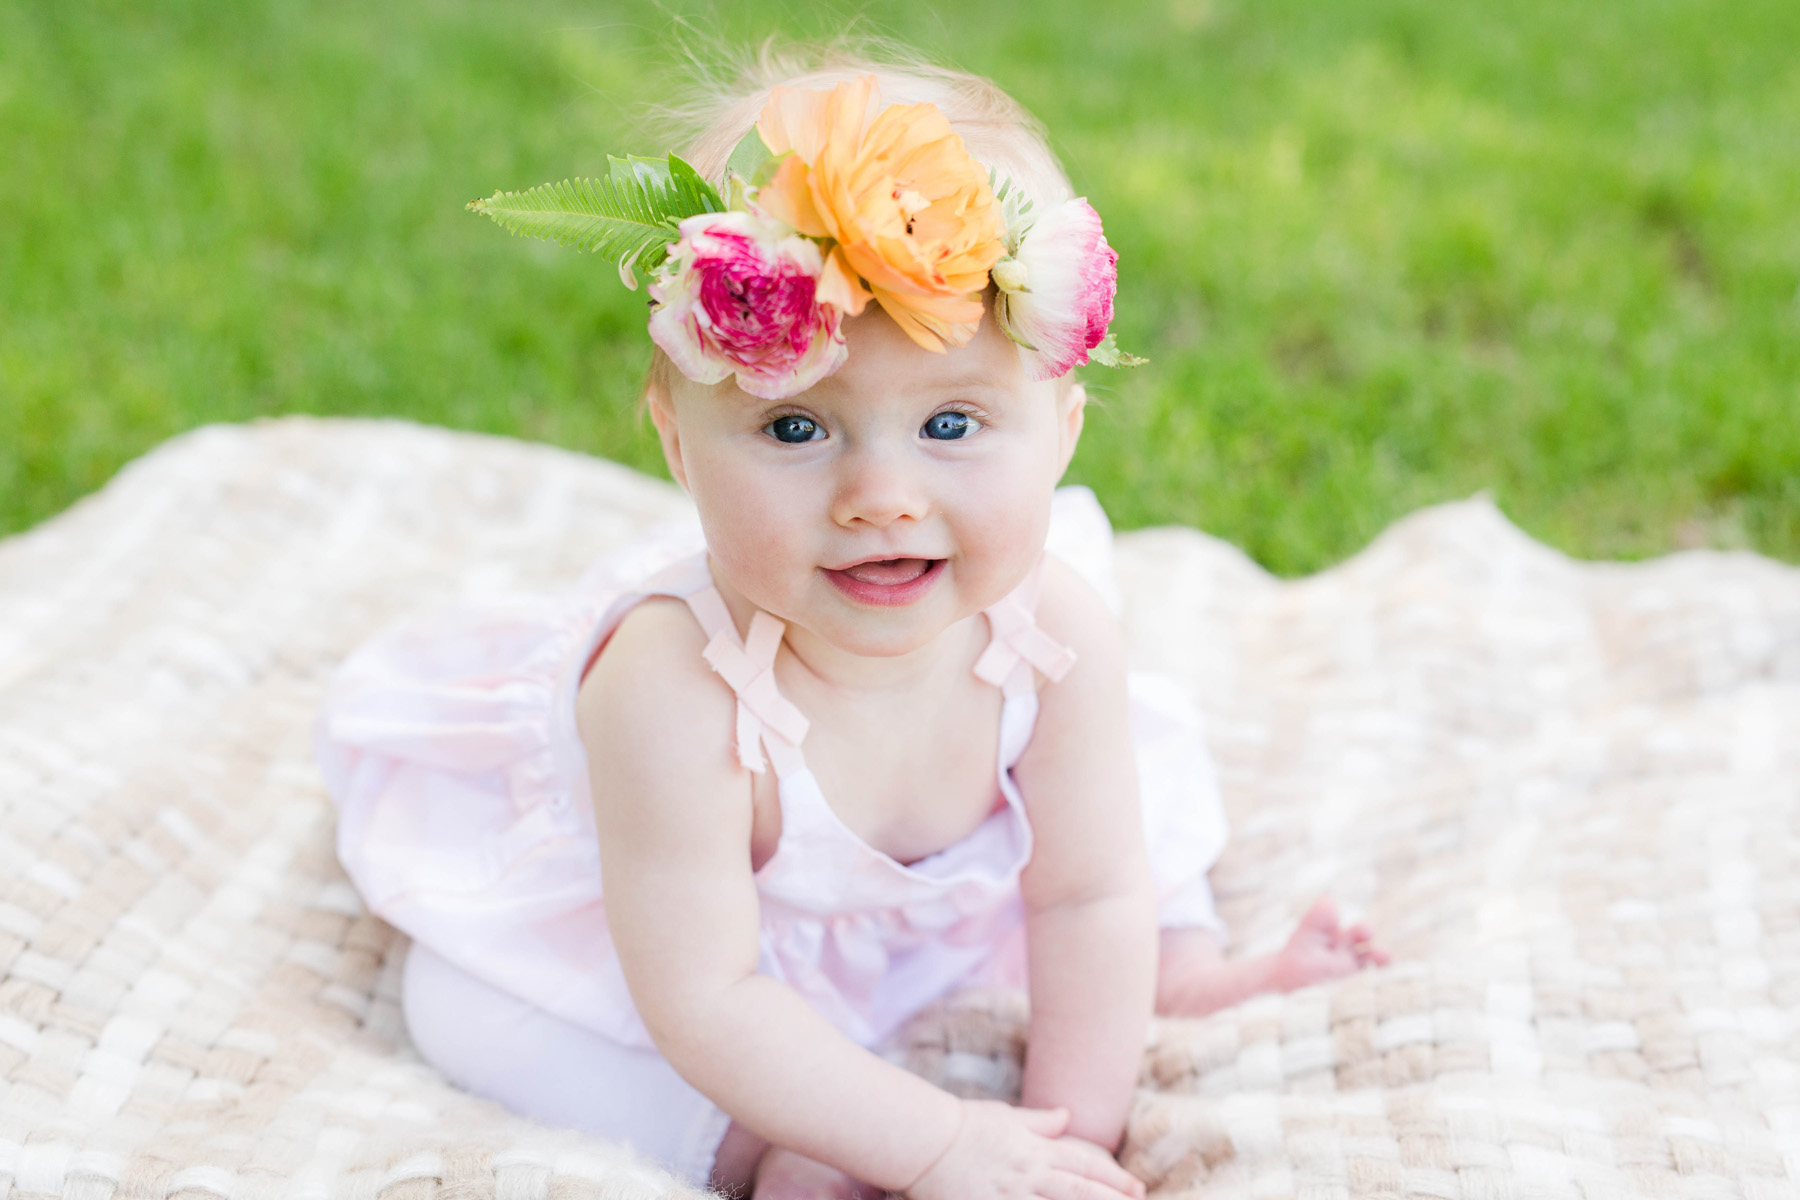 kristen_dyer_photography_johannesson_mothers_day_session